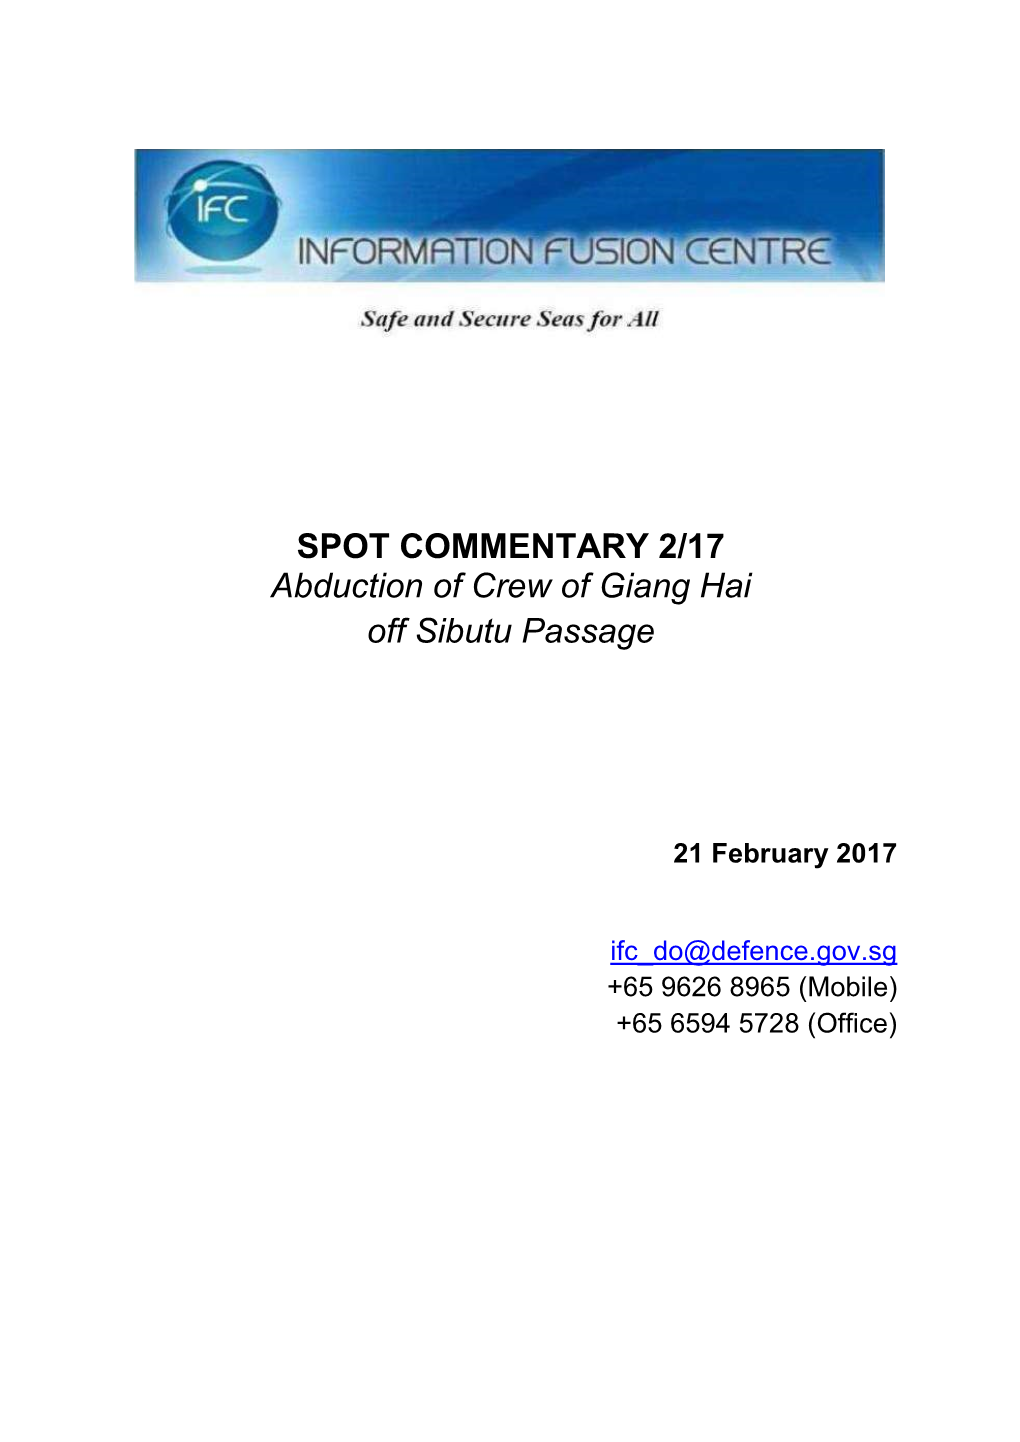 SPOT COMMENTARY 2/17 Abduction of Crew of Giang Hai Off Sibutu Passage